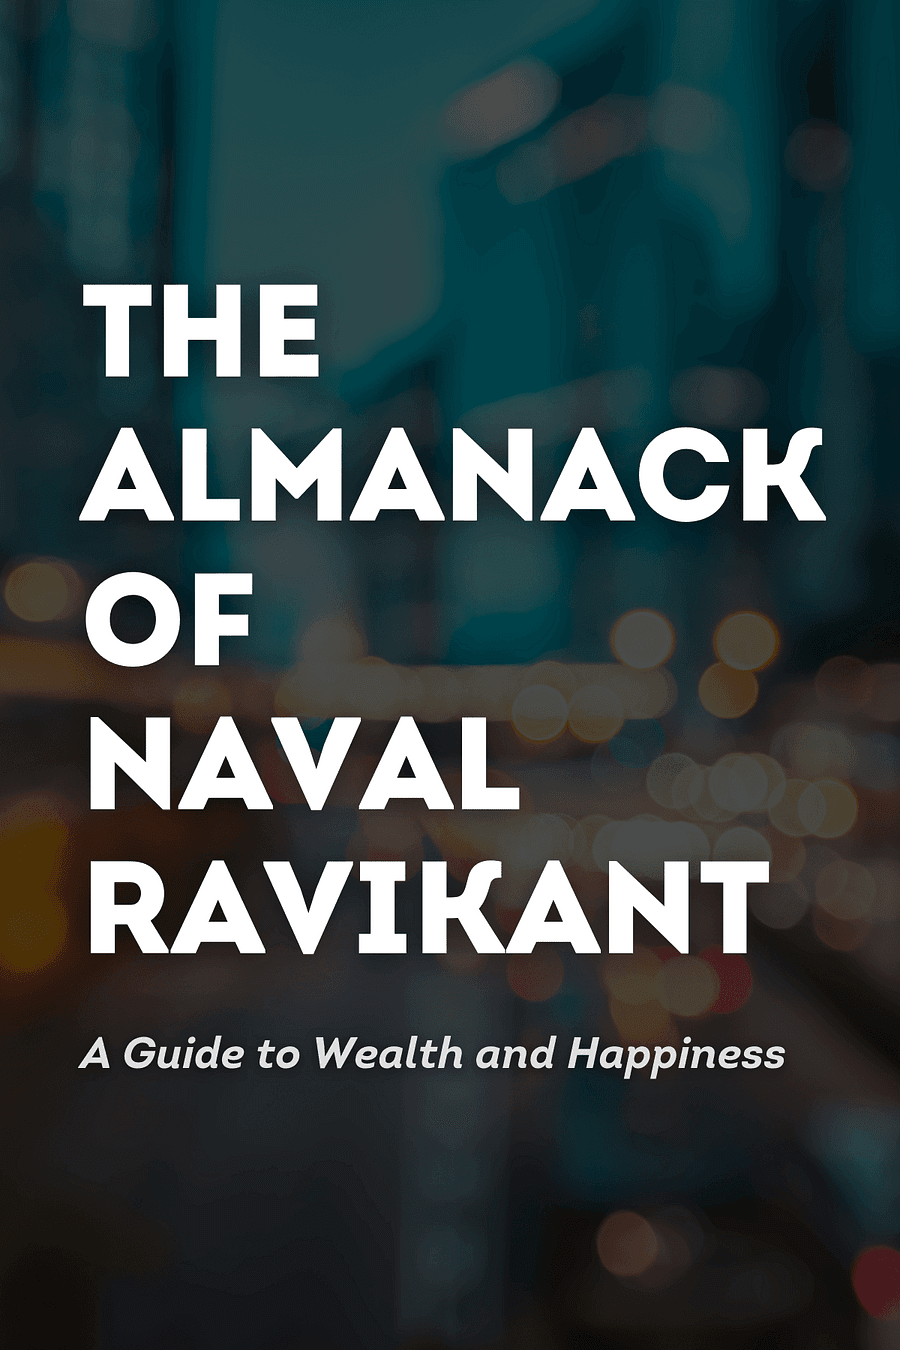 The Almanack of Naval Ravikant by Eric Jorgenson - Book Summary